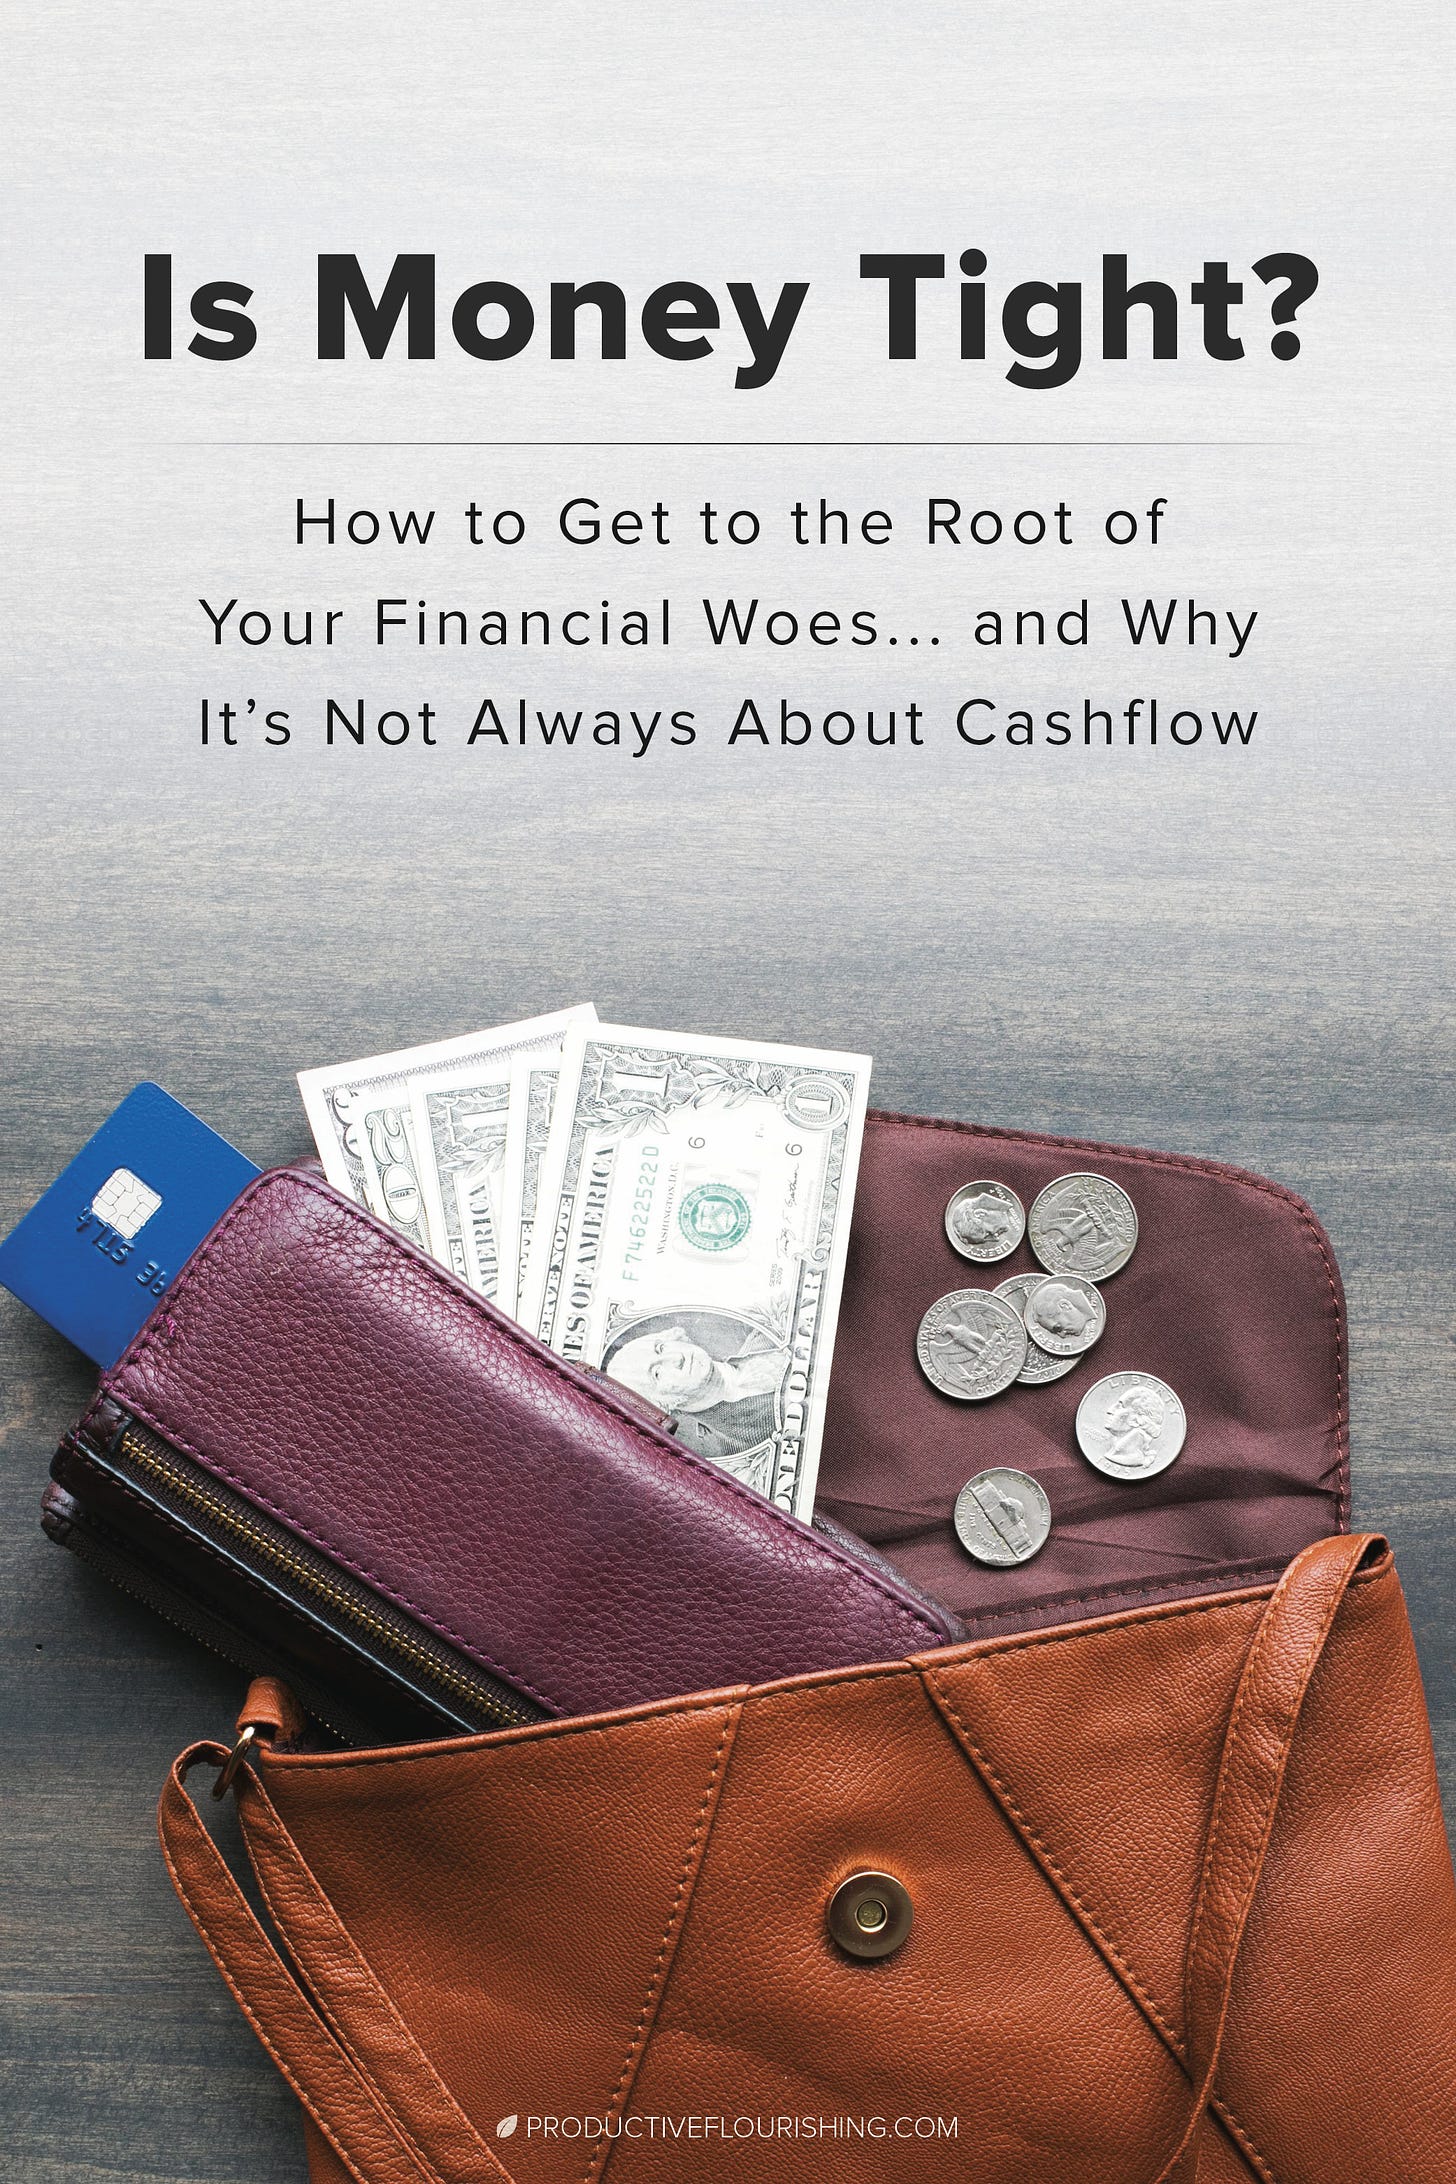 Is Money Tight? How to get to the root of your financial woes, and why it's not always about cashflow. This post isn’t about quitting, nor is it about those instances when the most dire outcome is shutting down or declaring bankruptcy. It is about viewing those seasons when money becomes a bottleneck as good things. #cashflowproblems #businessevaluation #productiveflourishing